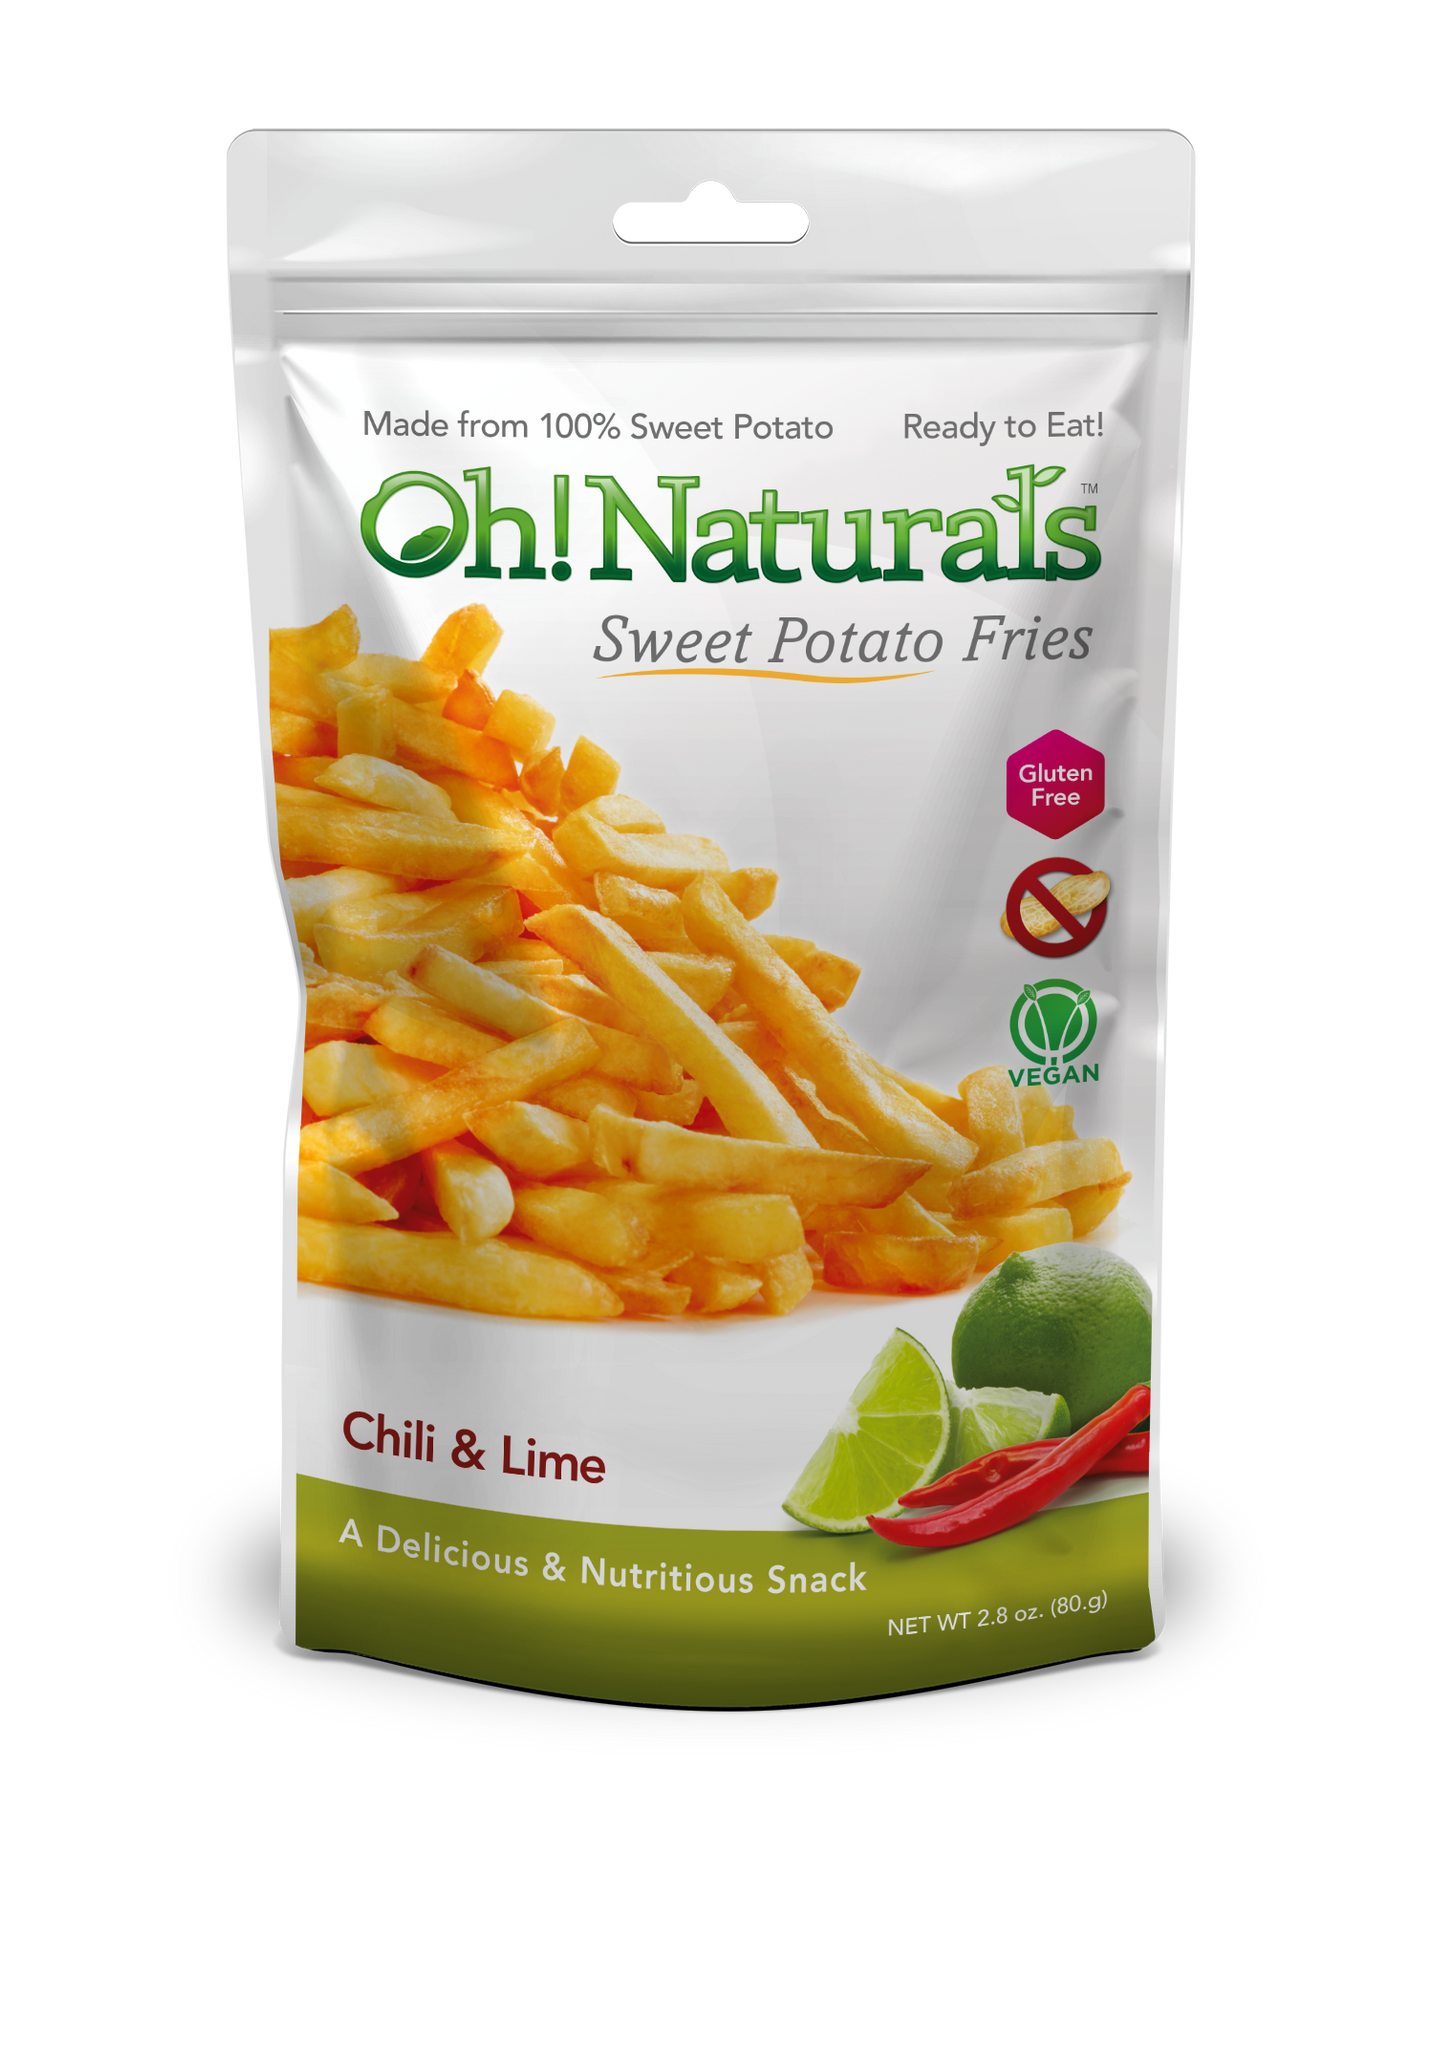 Chili & Lime Sweet Potato Fries - Oh! Naturals